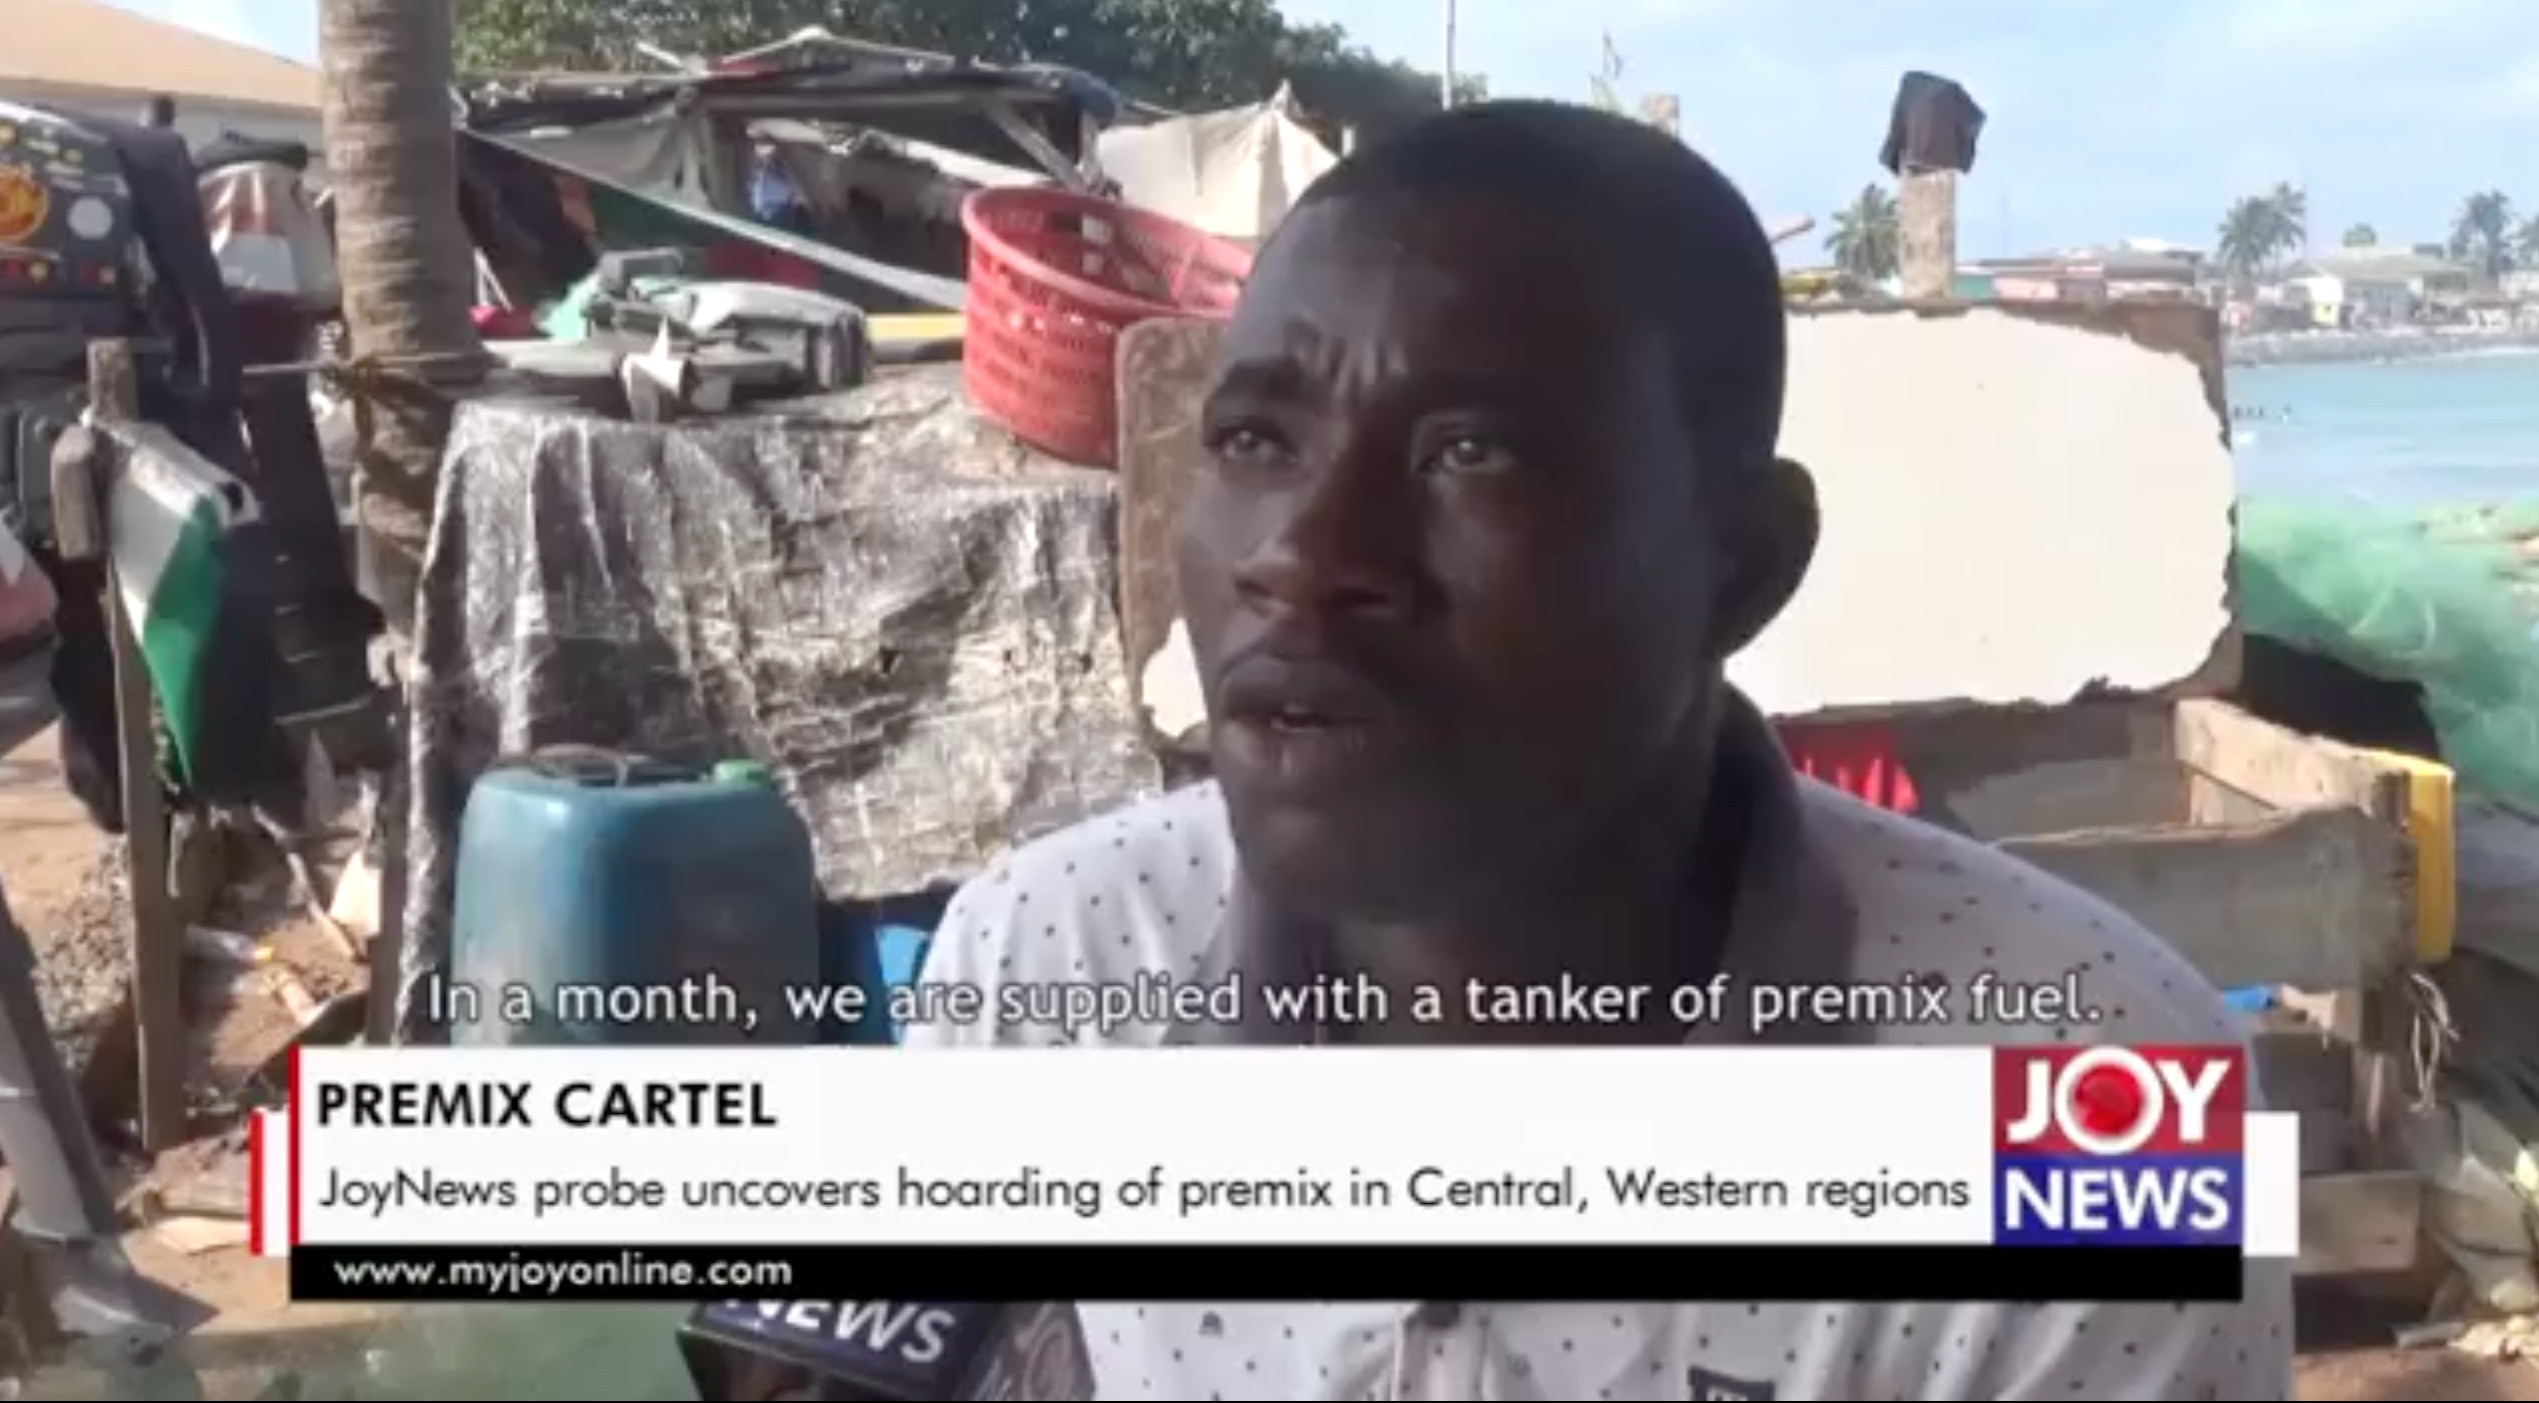 PREMIX CARTEL - JOY NEWS INVESTIGATIONS UNCOVER HOARDING IN THE CENTRAL & WESTERN REGIONS